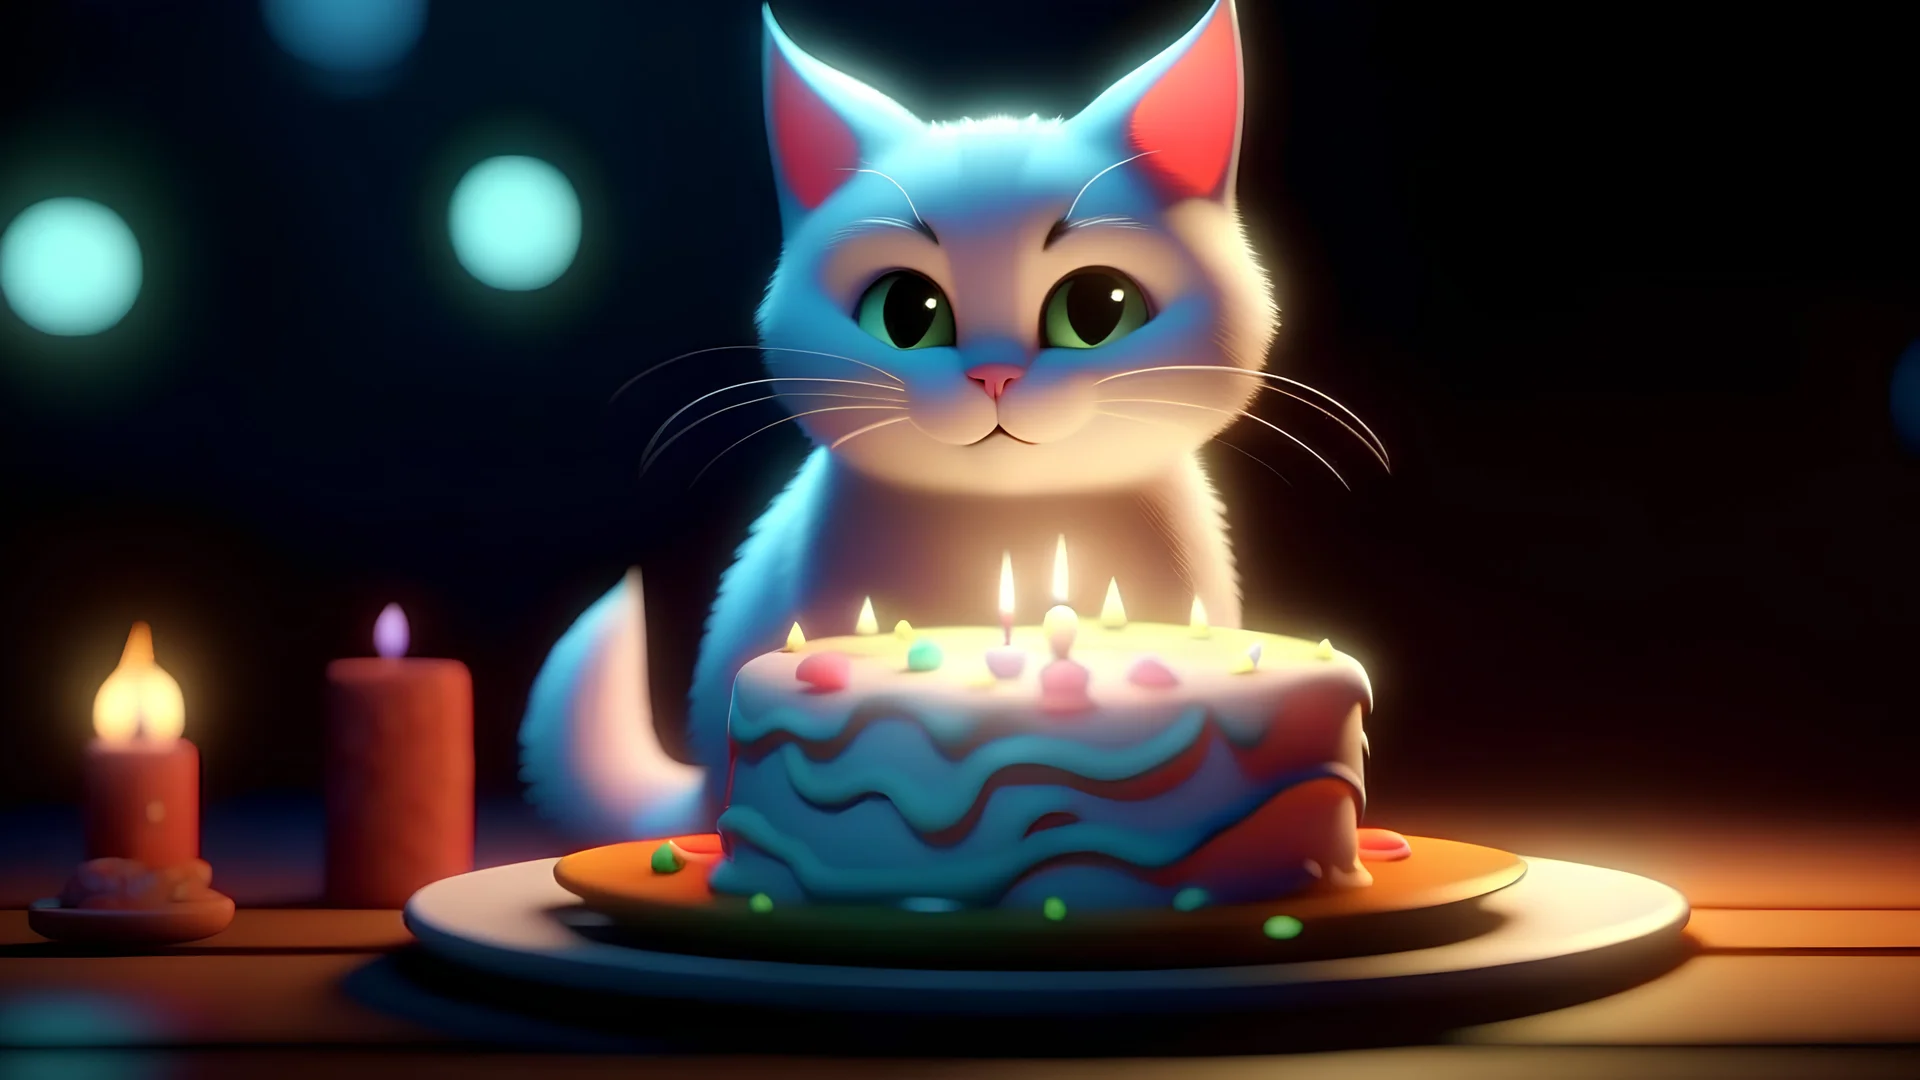 white cat eating cake with cinematic light Pixar style cool colors